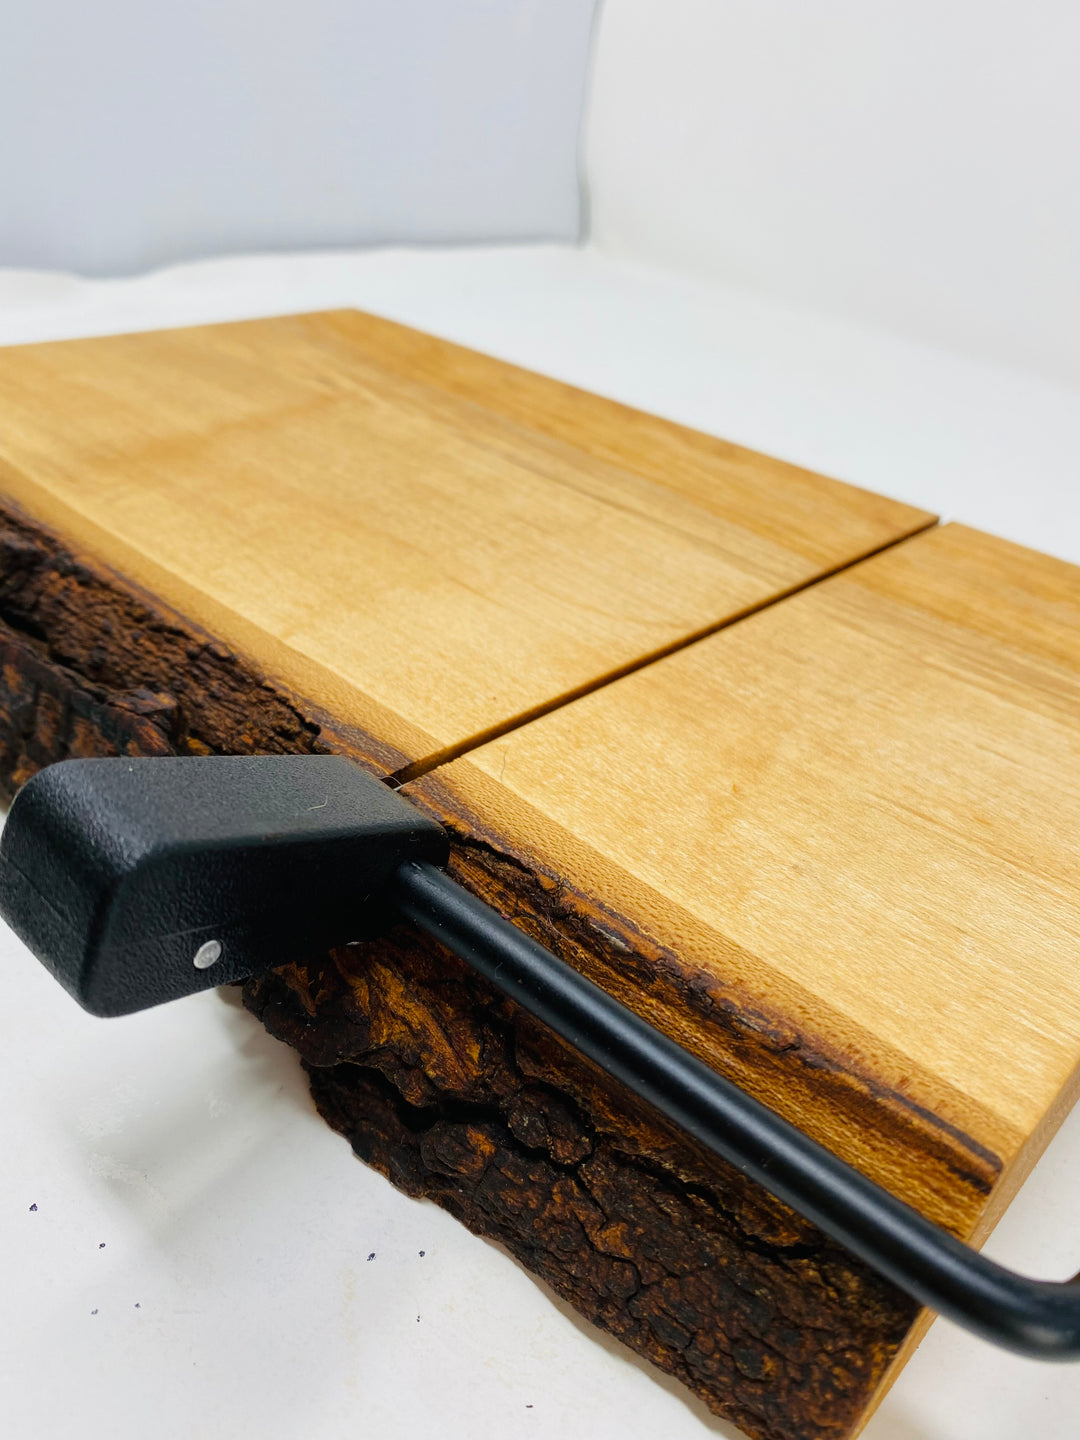 Cheese Slicer Pecan Black Handle Face Grain Cheeseboard 11 1/8 inch x 7 inches x 1 1/4 inches 1053